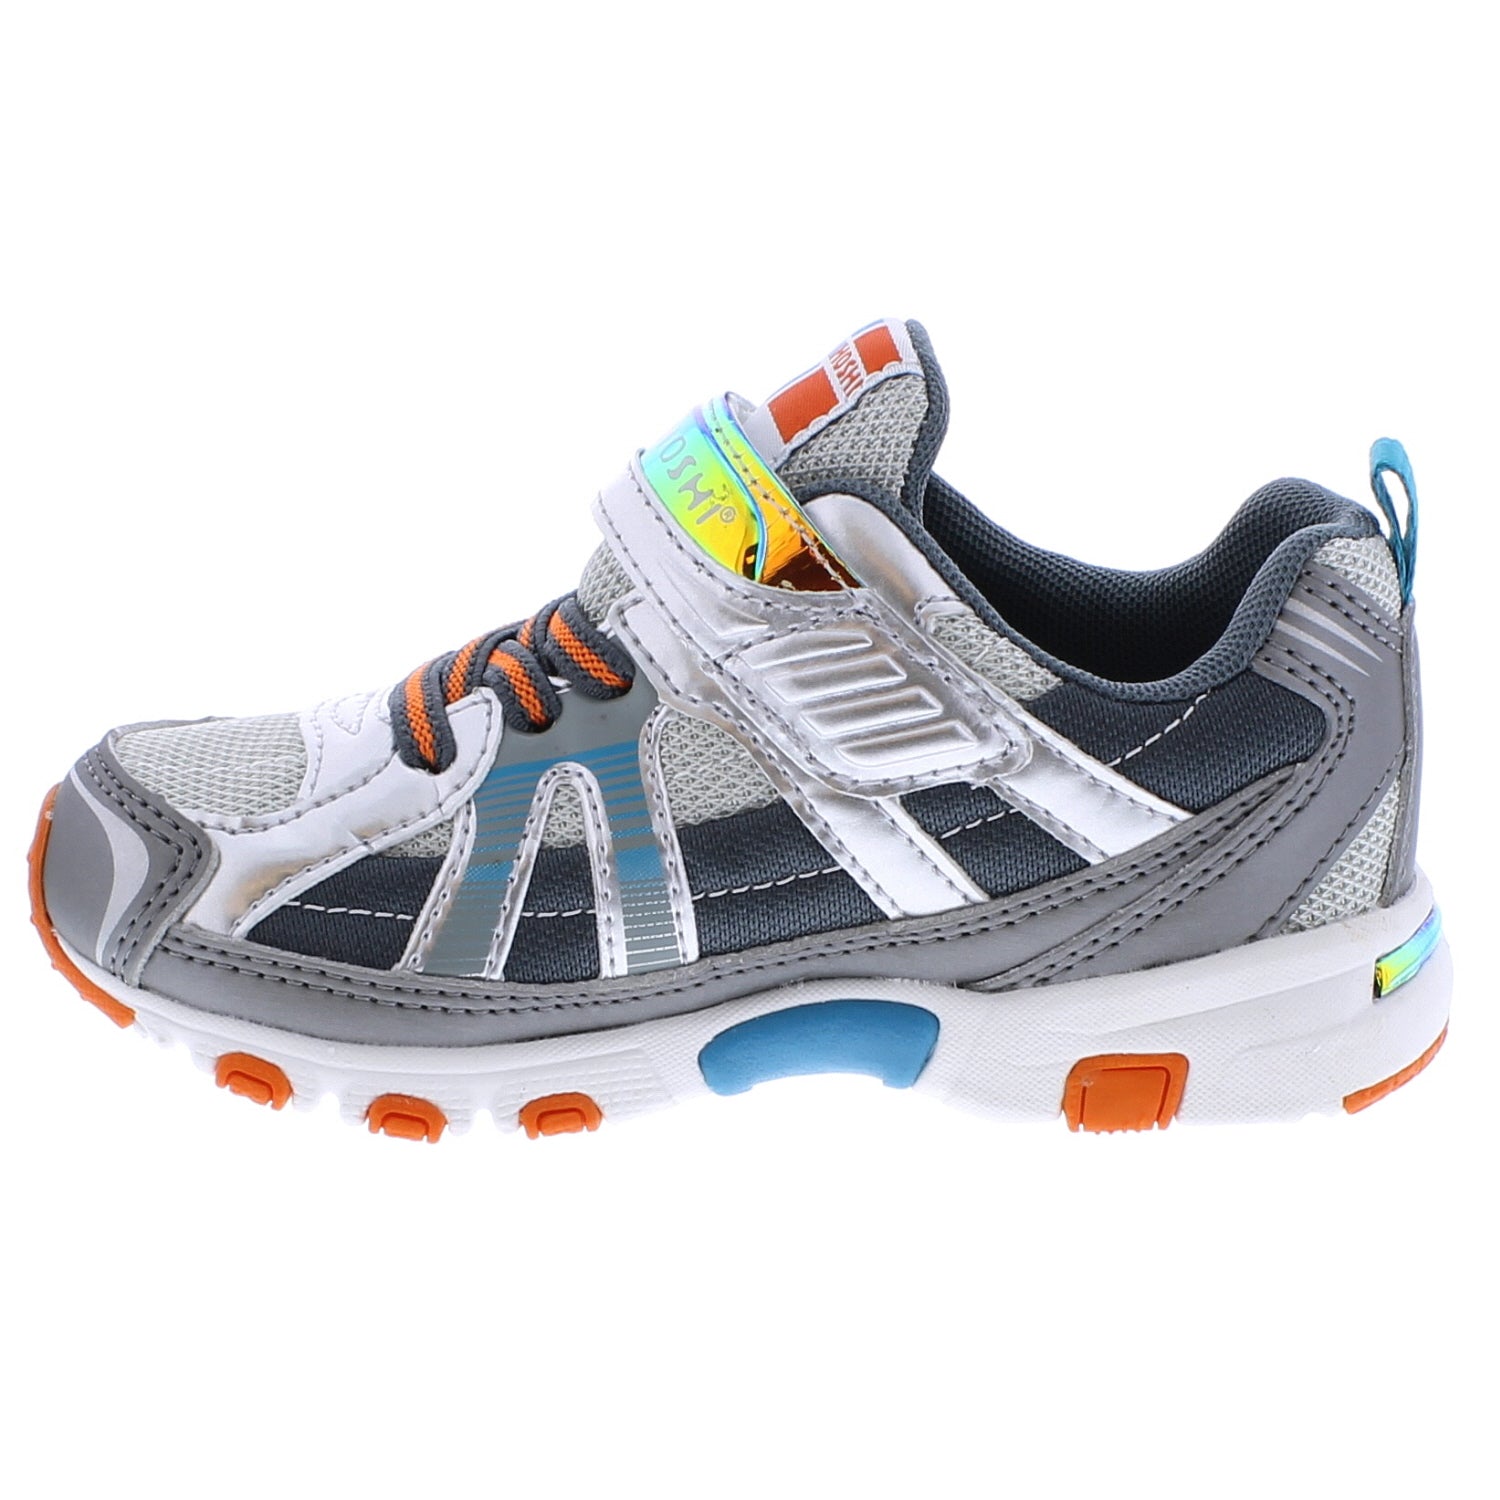 Storm Kid's Athletic Trainer - Silver/Gray